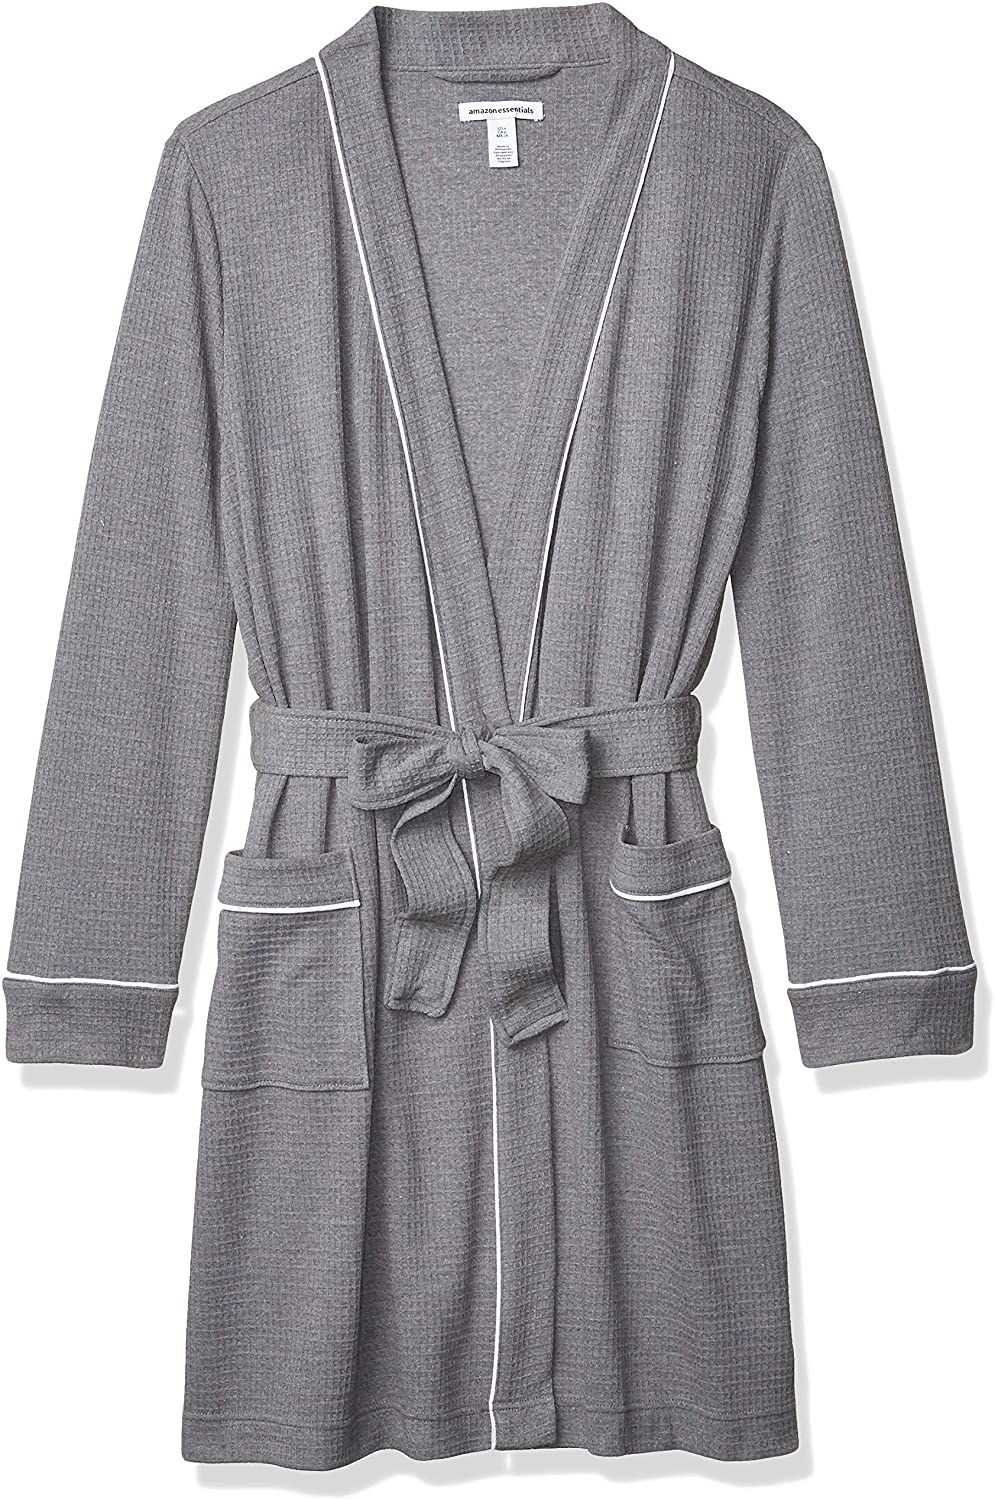 the robe in grey with white piping and tie belt 